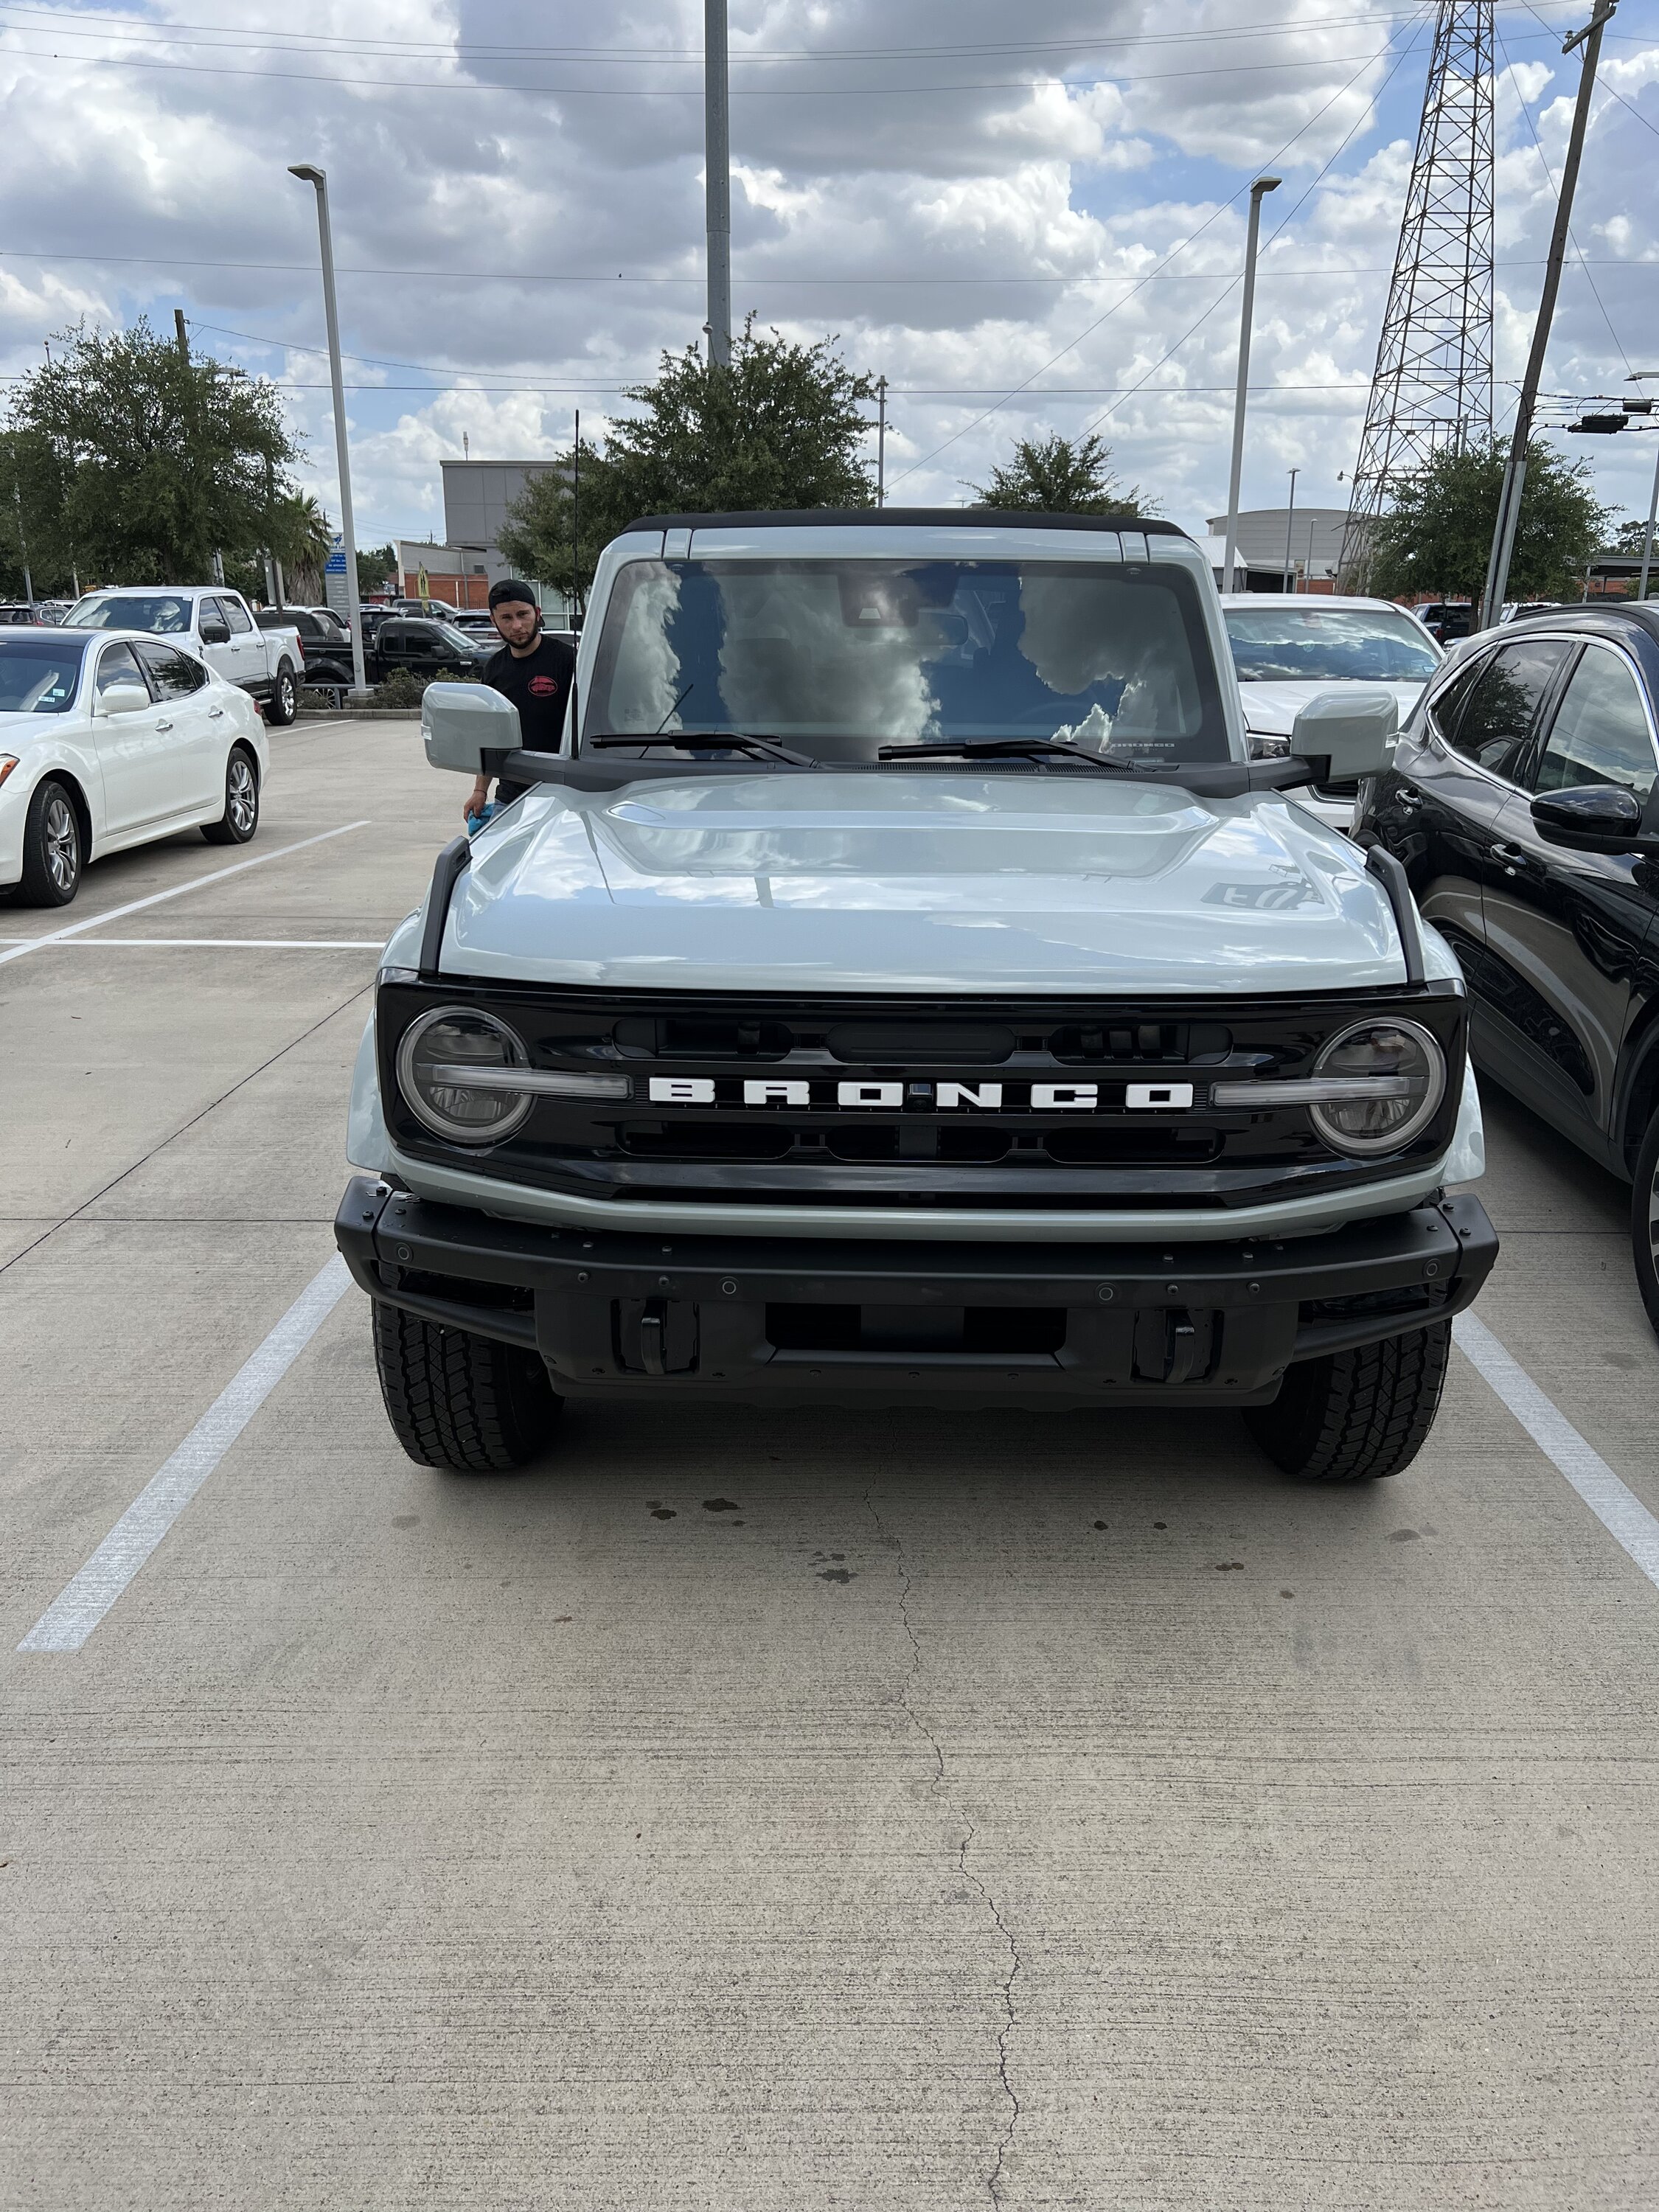 Ford Bronco Brand new Outer Banks - Cactus Gray, High Package, Leather 3AB83989-F8E8-44BA-A11E-DE9494EFEBEB